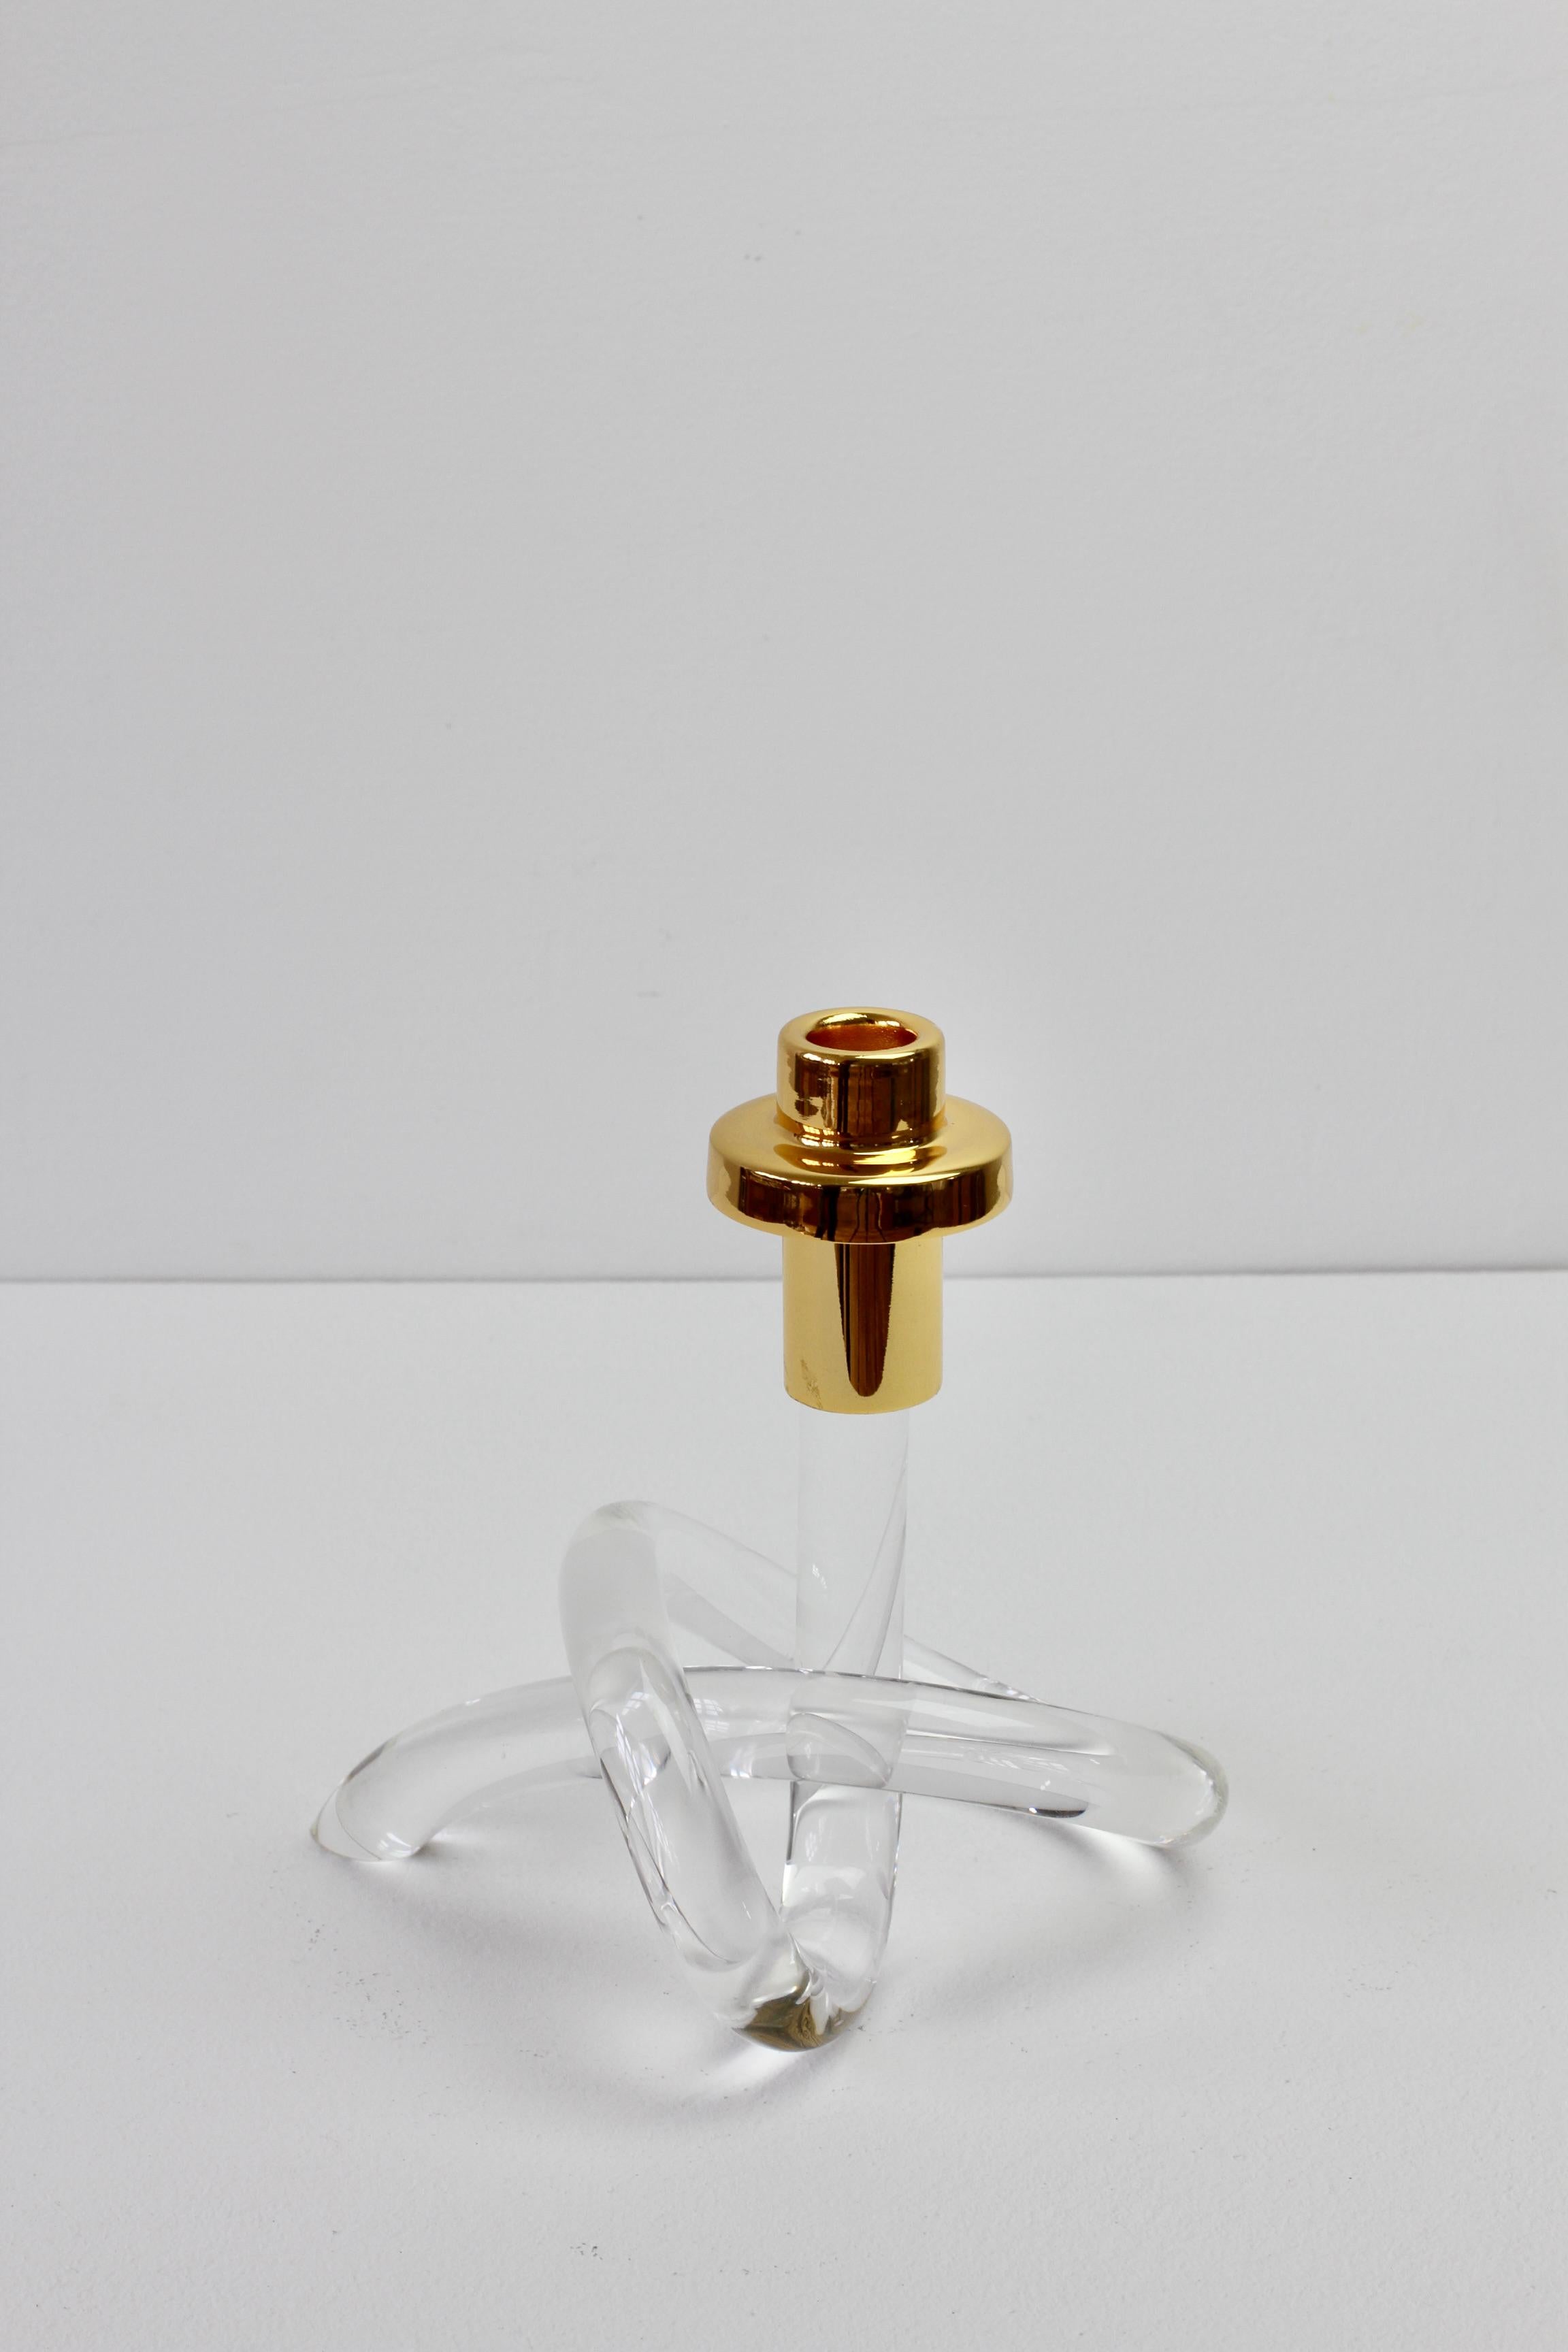 A single Lucite and gold-plated brass candlestick holder/candelabrum by American designer Dorothy Thorpe, circa 1940s. With its use of a single piece bent and twisted acrylic to form the whimsical base, it is often referred to as the 'pretzel'